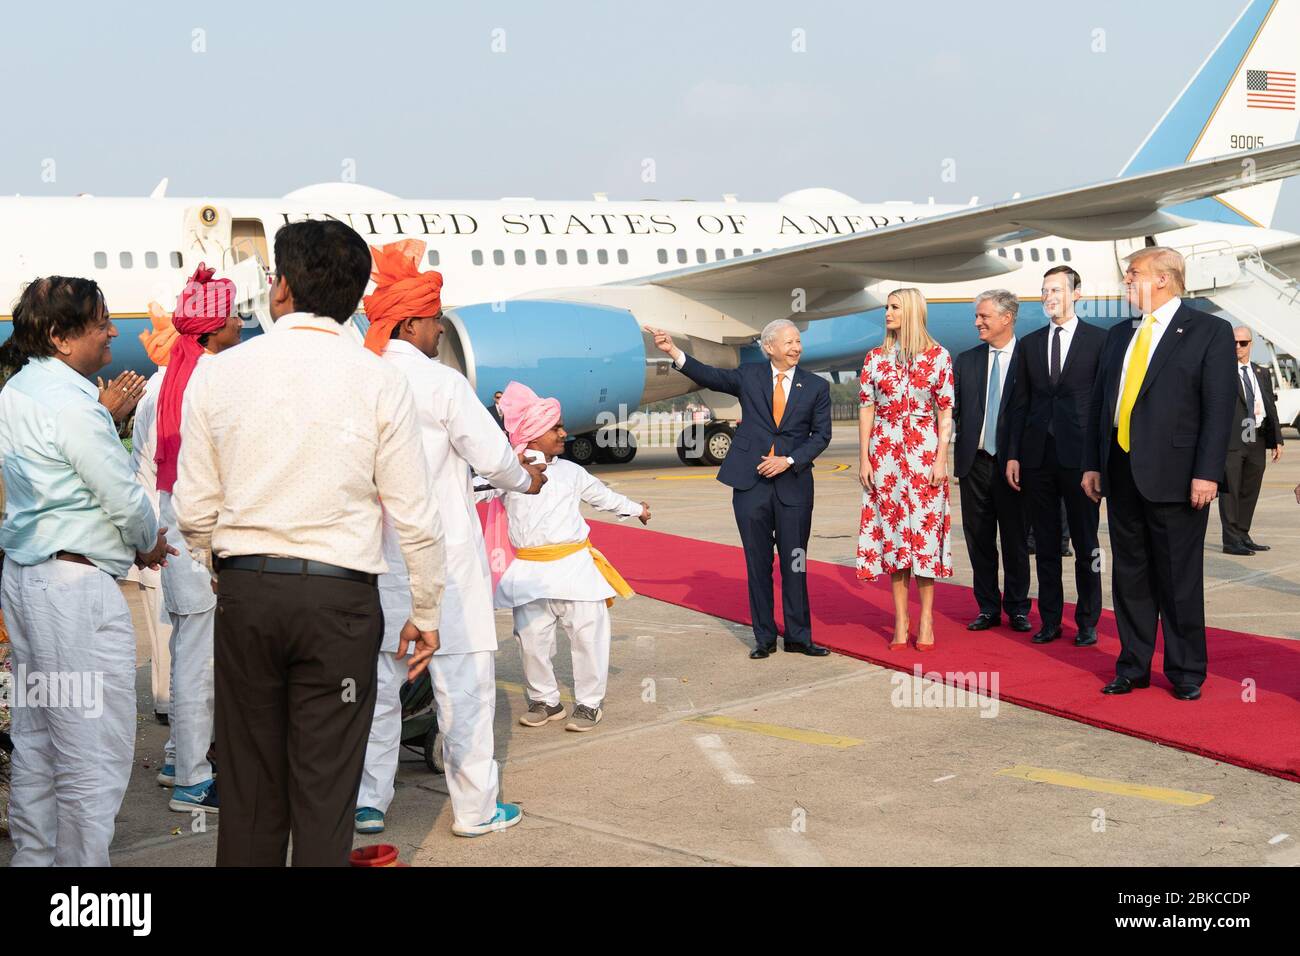 President Donald J. Trump and members of the U.S. delegation stop during their red-carpet arrival to view some of the 300 cultural performers Monday, Feb. 24, 2020, at Agra Air Base in Agra, India. President Trump and the First Lady in India Stock Photo